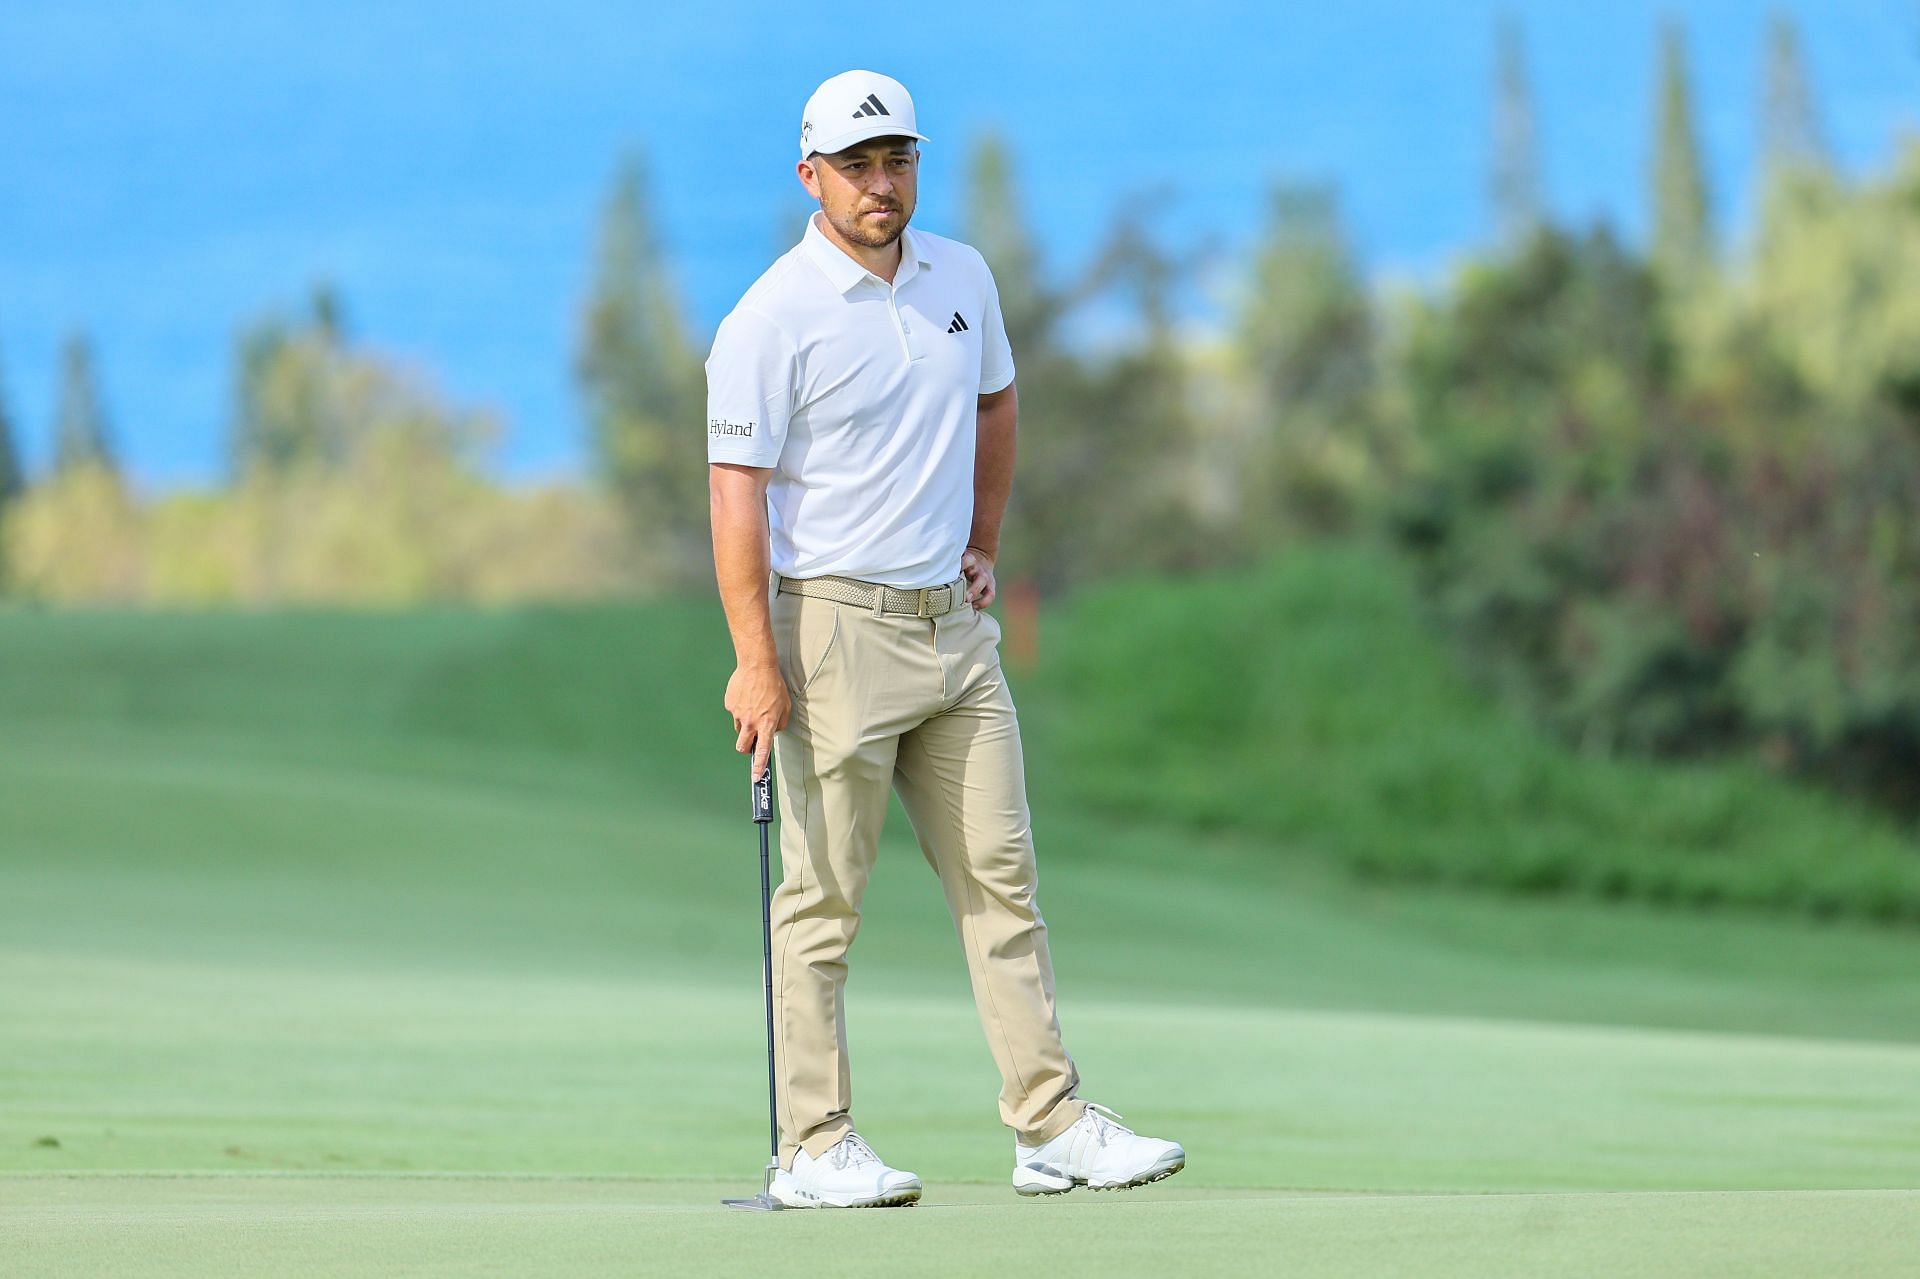 I'm kind of just swinging” - Xander Schauffele unsure about back ache  causing him troubles in Hawaii